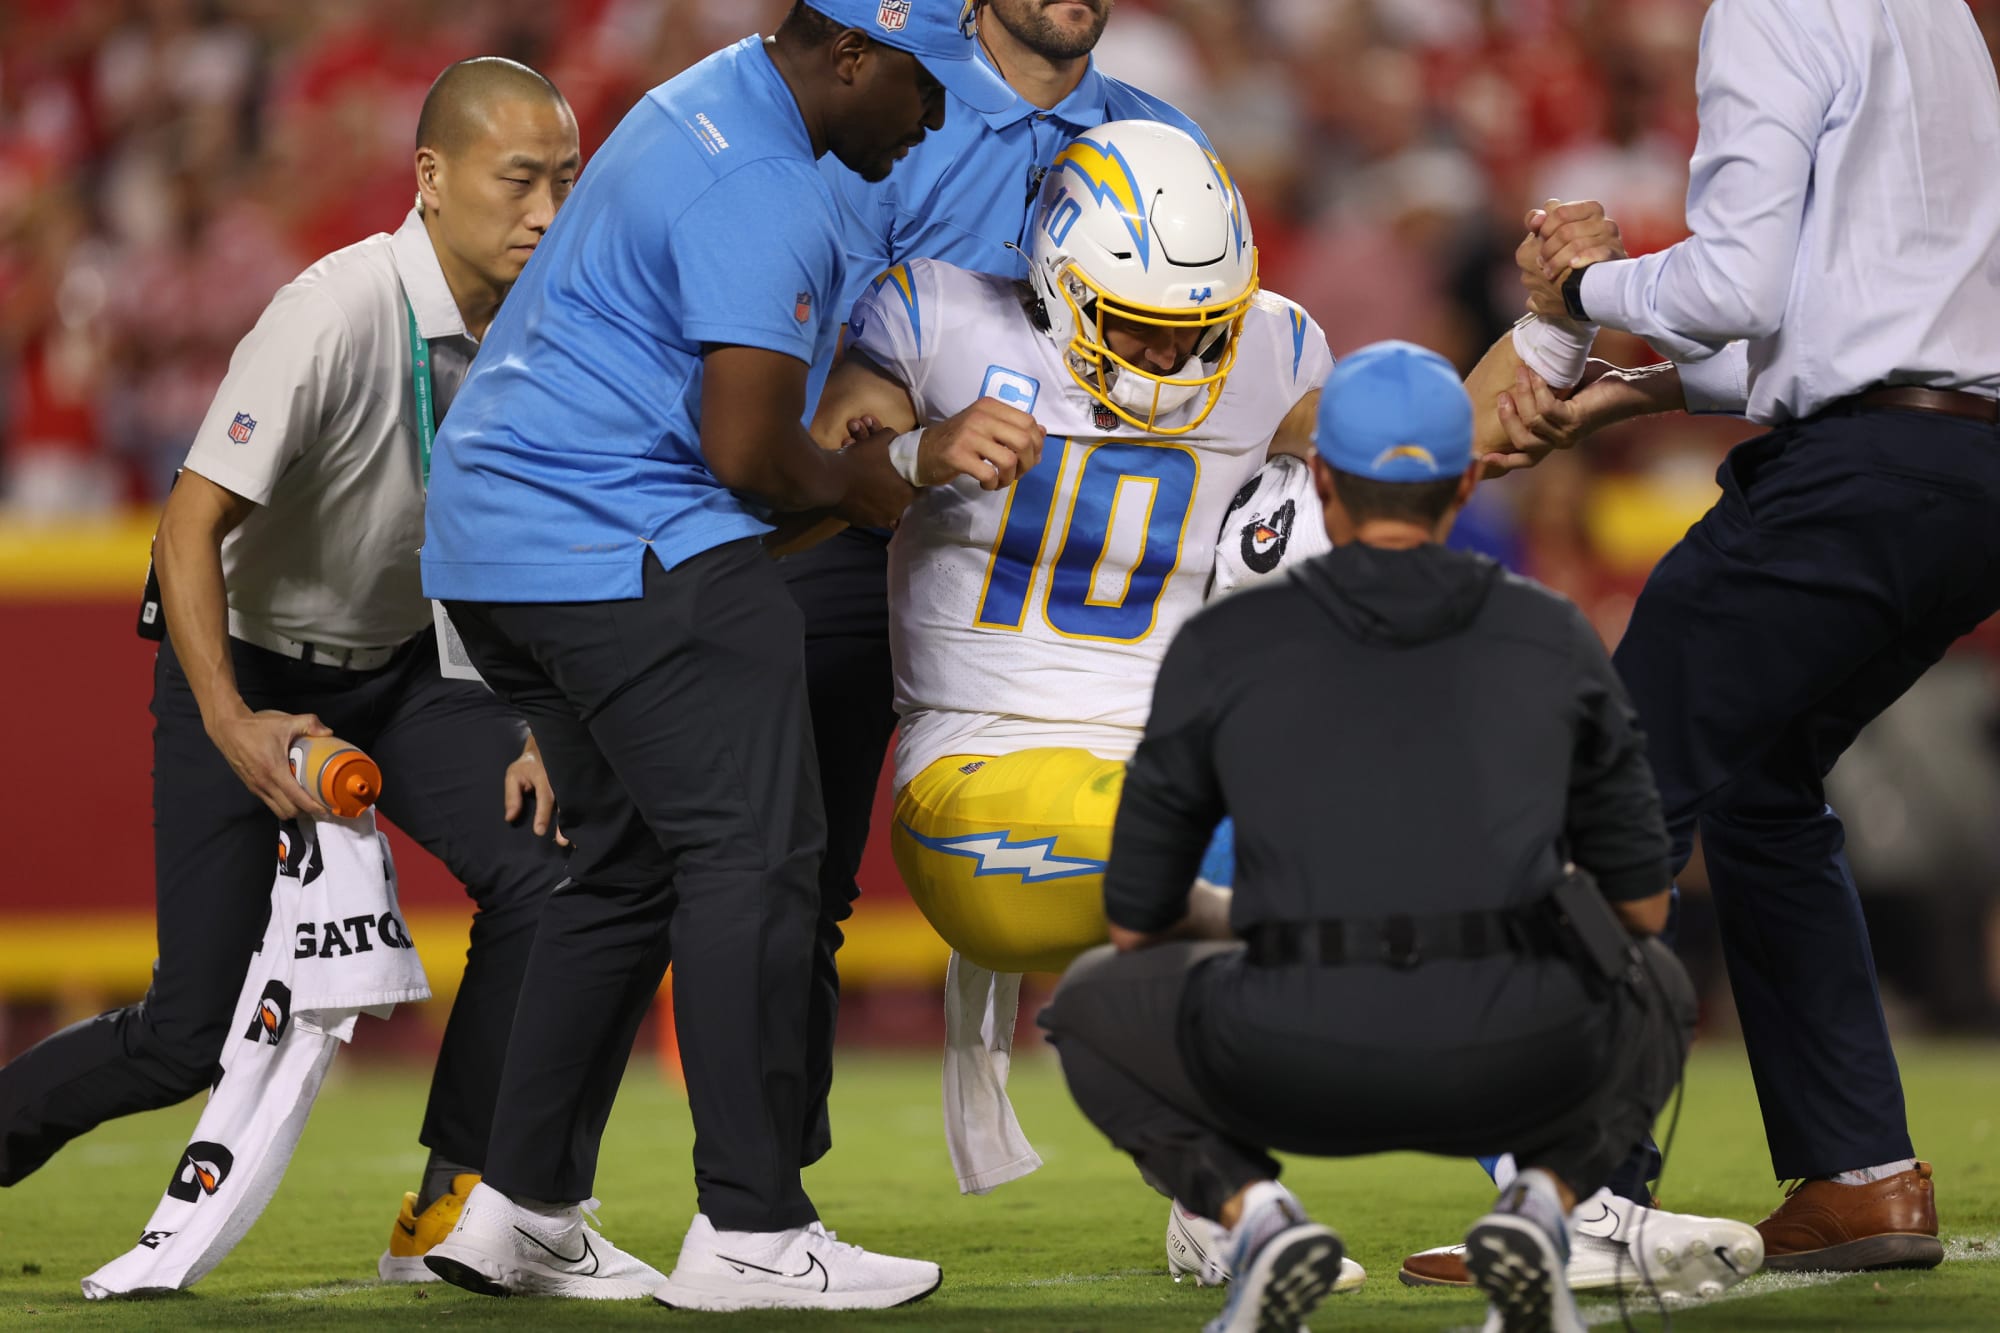 Chargers fans need to hold their breath